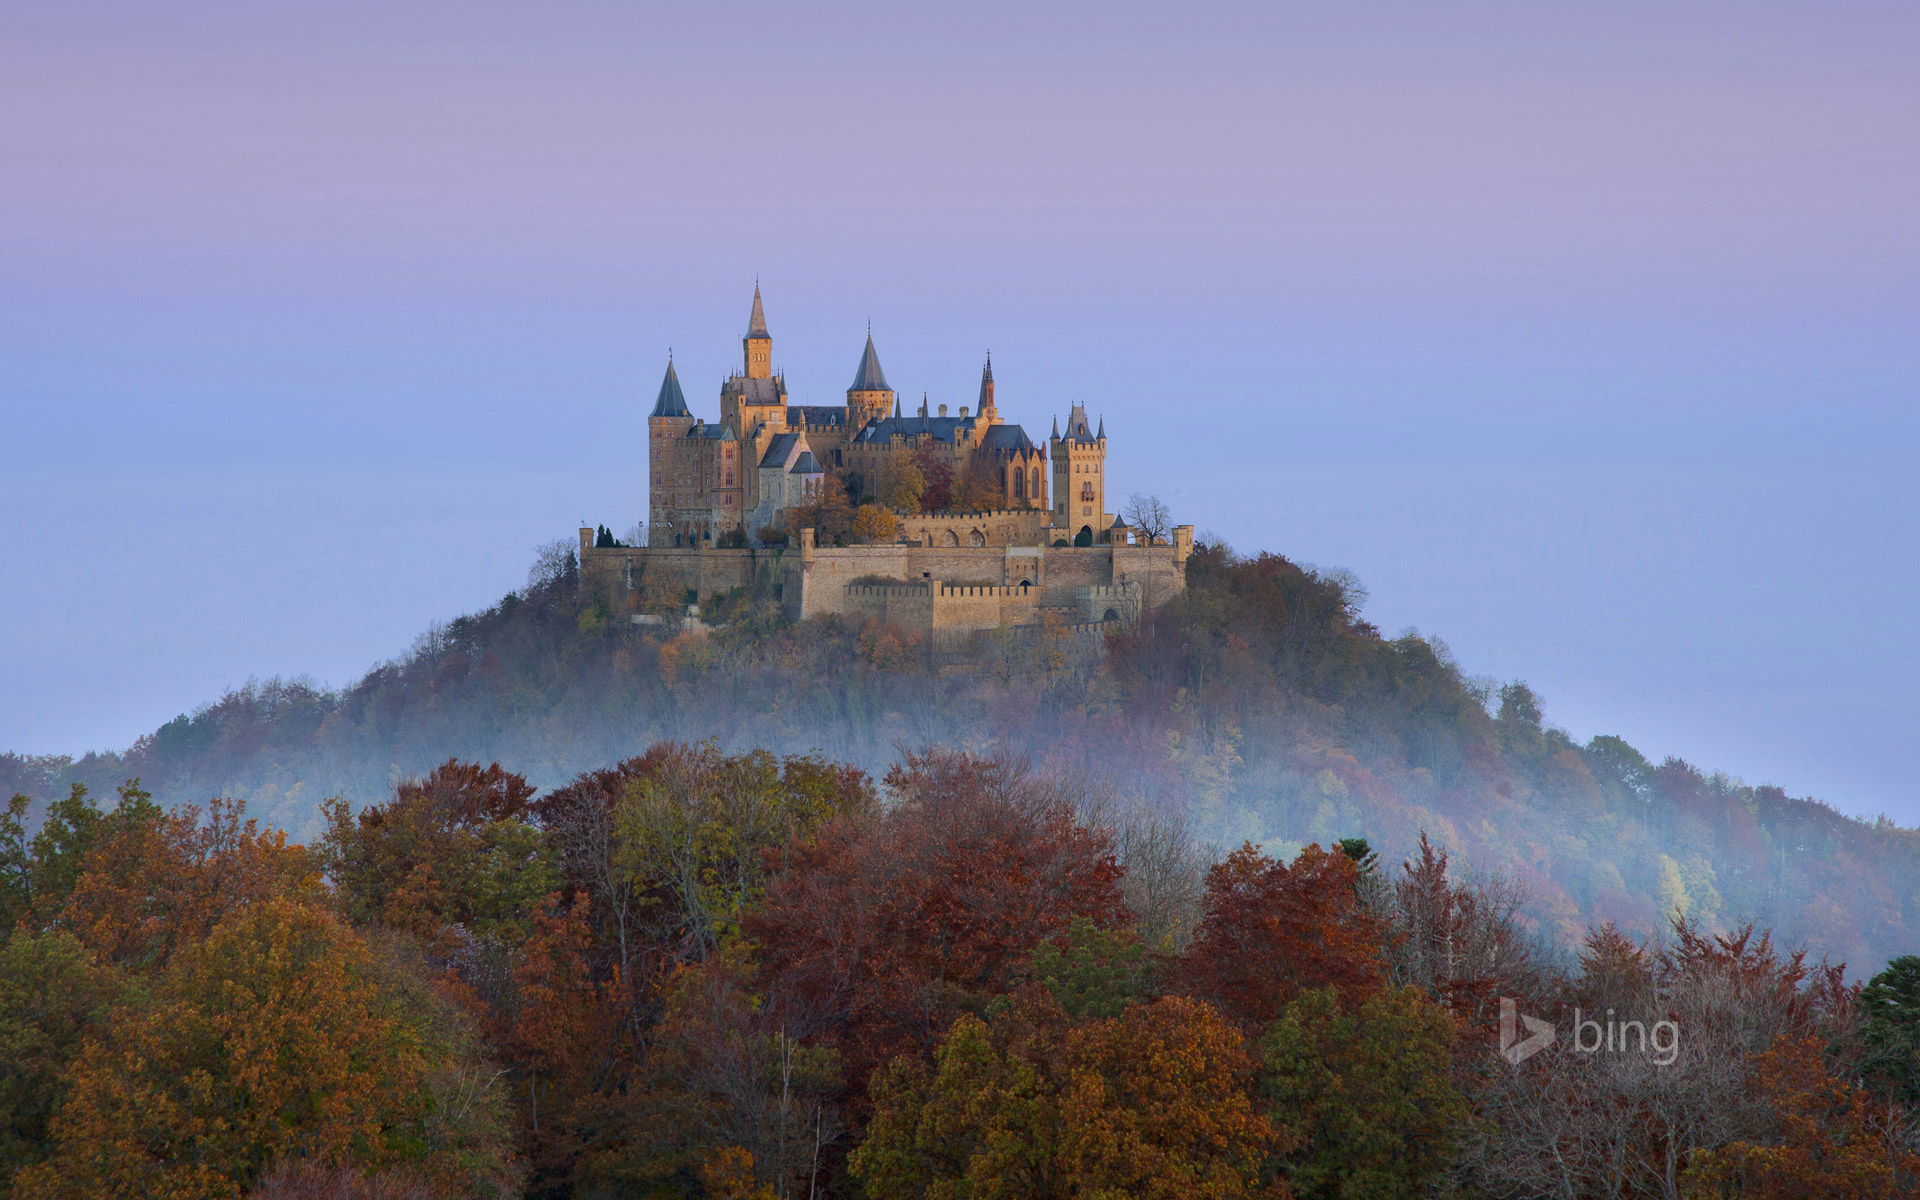 Wallpaper. Golden autumn. photo. picture. Germany, the Hohenzollern castle, the sky, mountain, forest